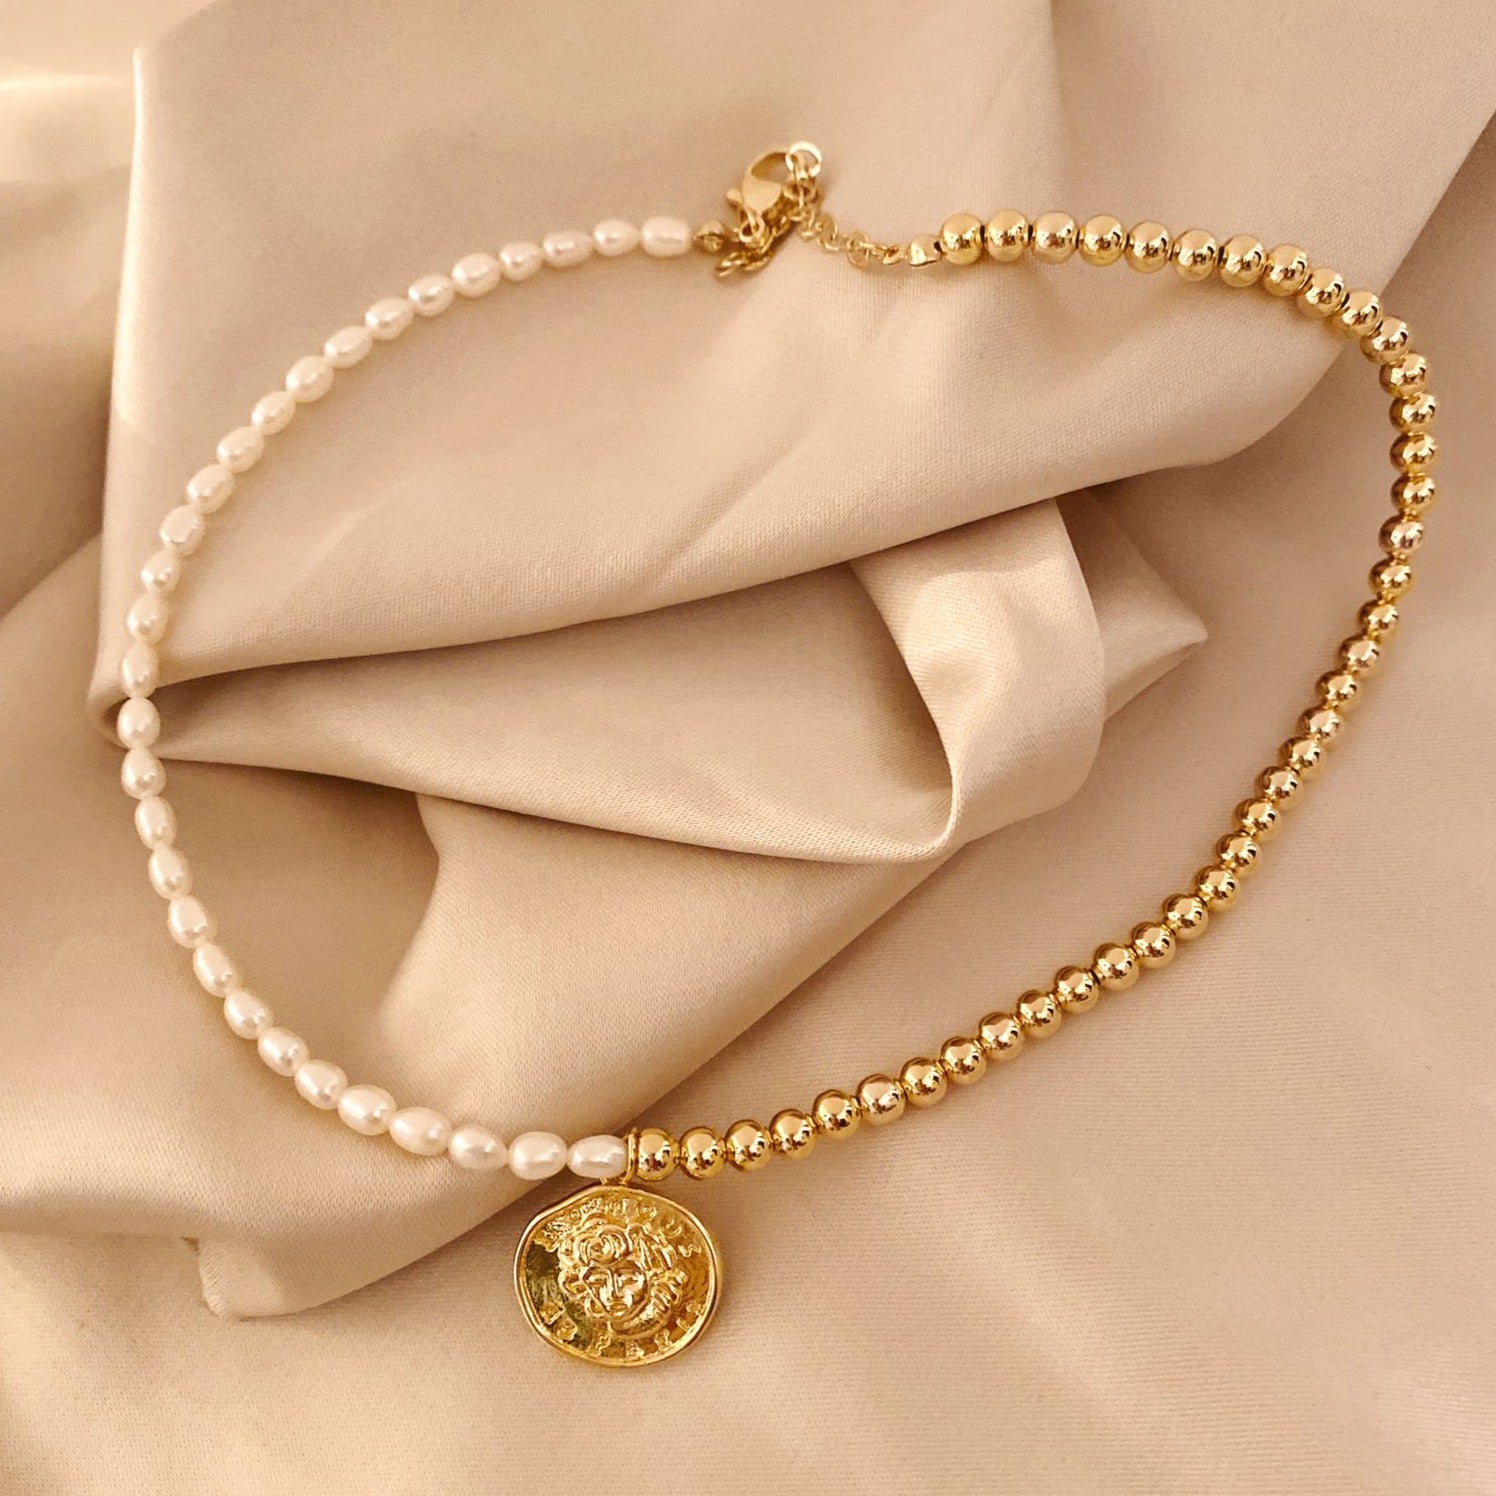 Pearl Necklace with Antique Medallion